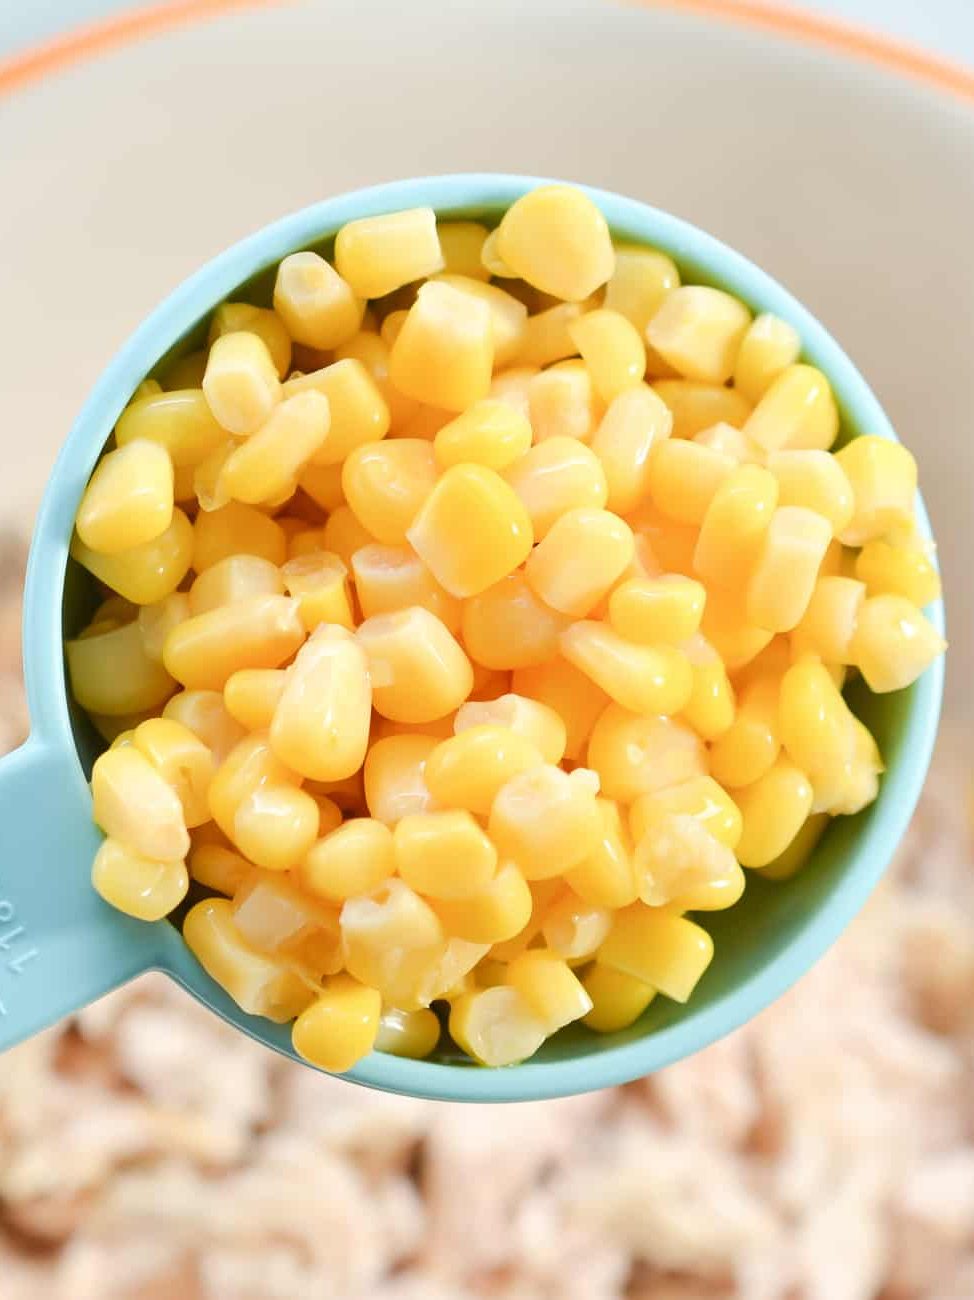  In a large bowl, mix in ½ cup of Canned corn drained.